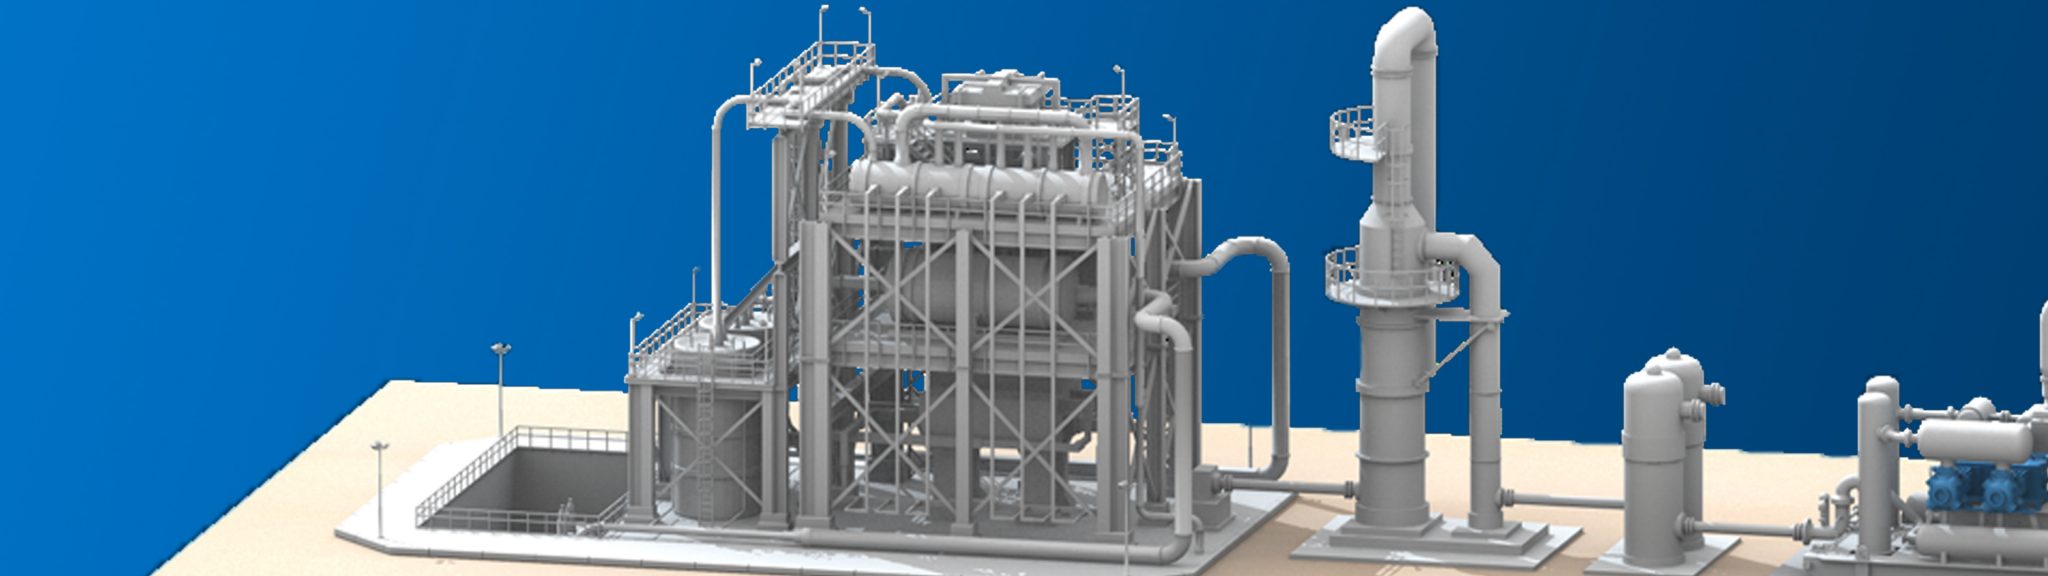 a rendering of the processing unit in the Acid Gas Service Unit